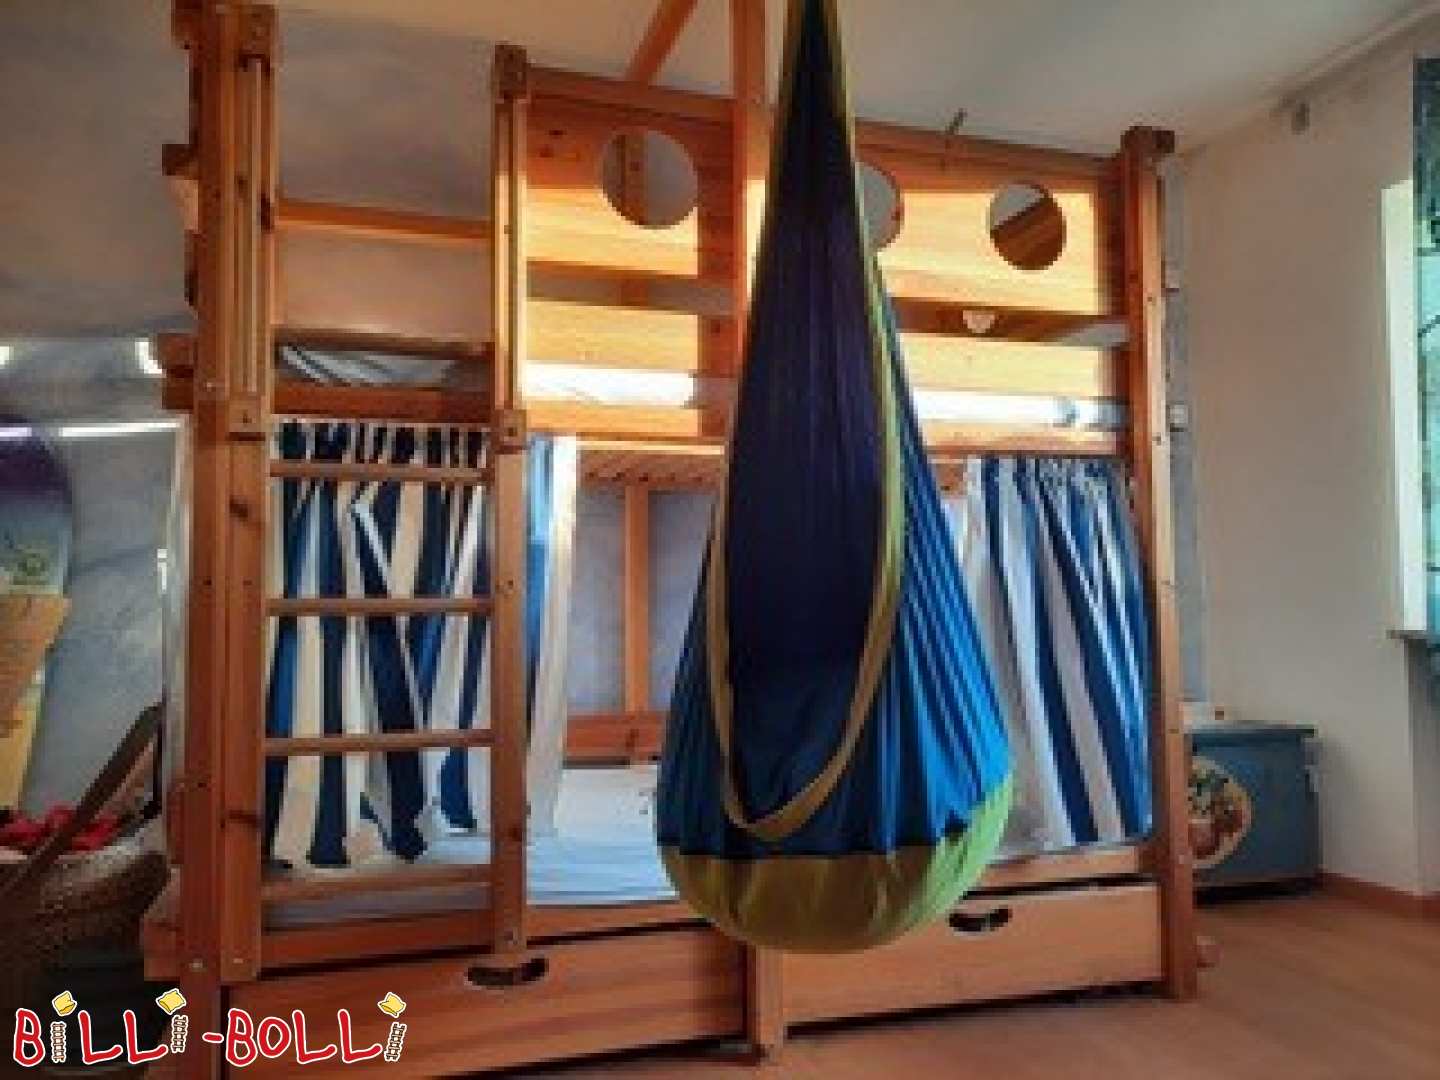 Loft bed, mattress size 90 x 200 cm made of pine untreated (Category: second hand loft bed)